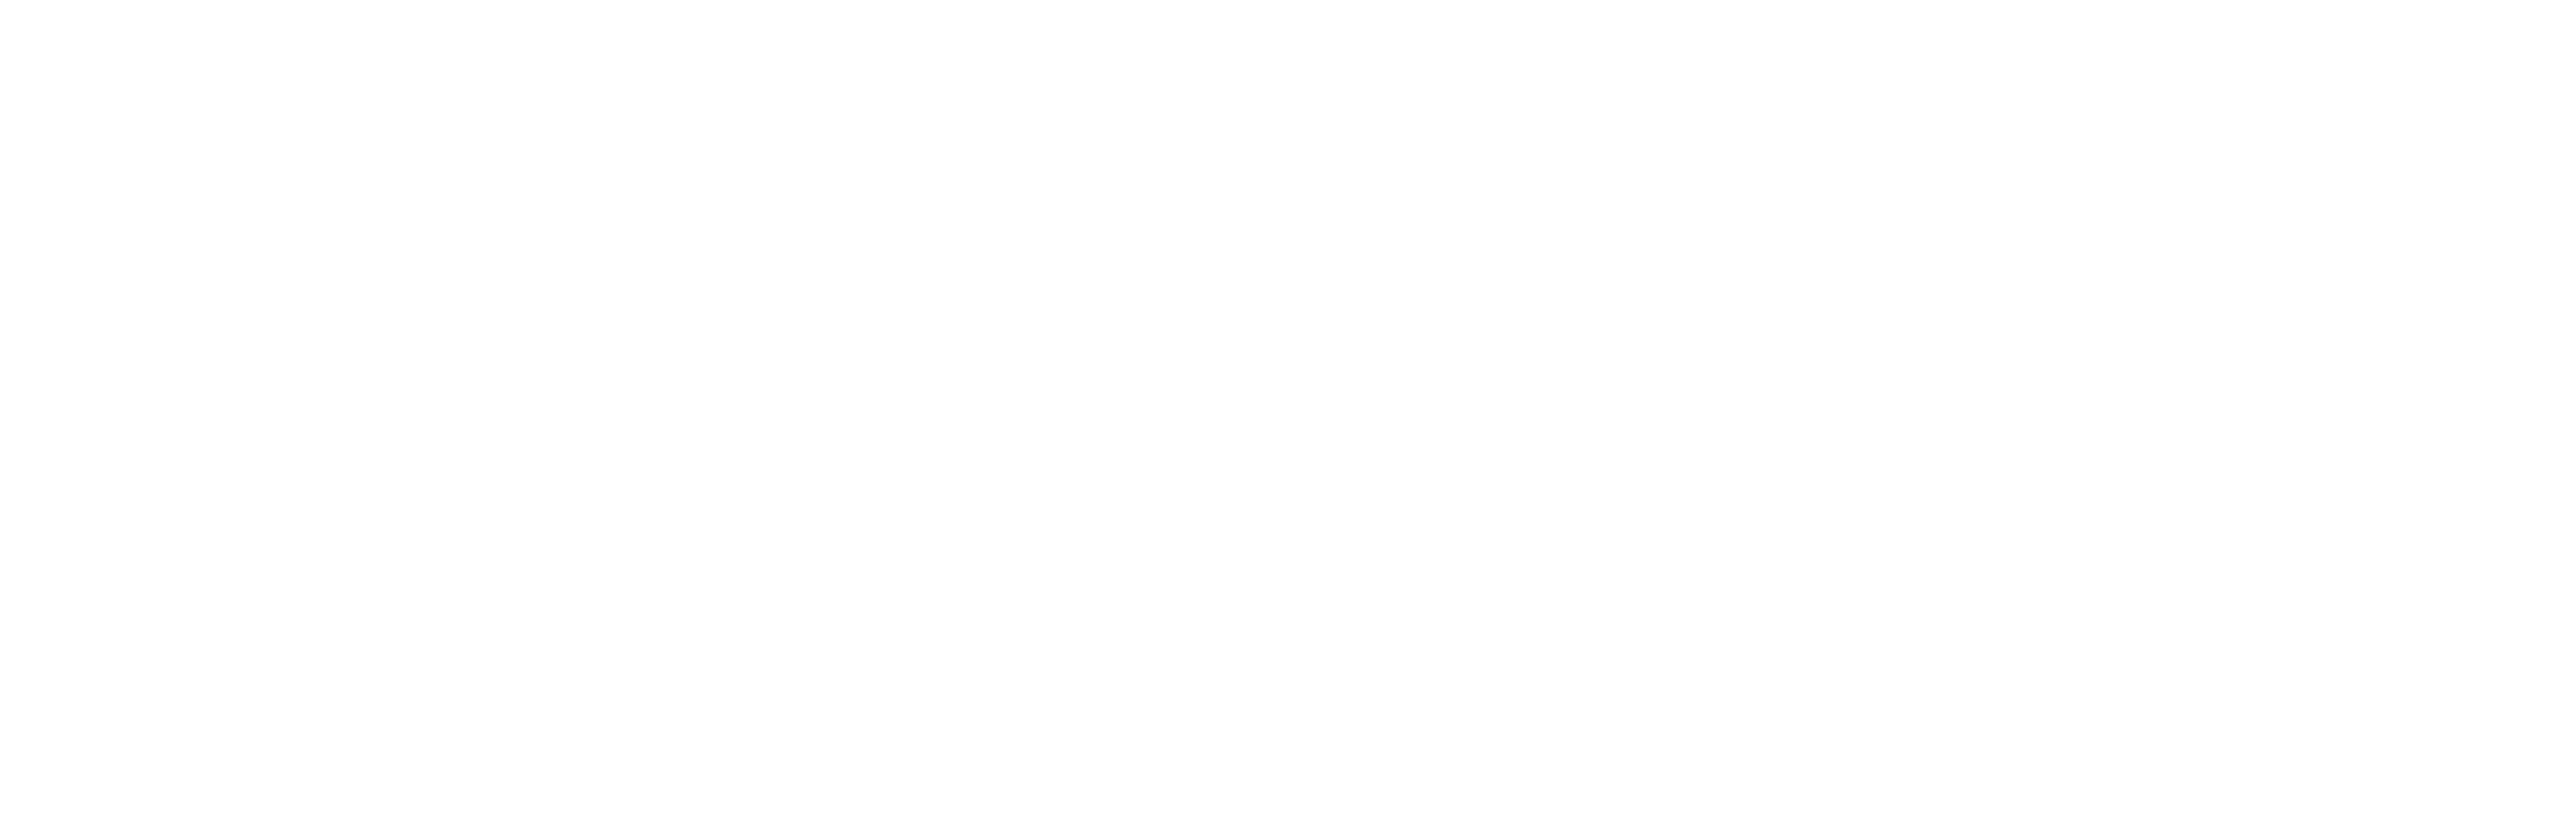 Above the Line Homebuyers logo